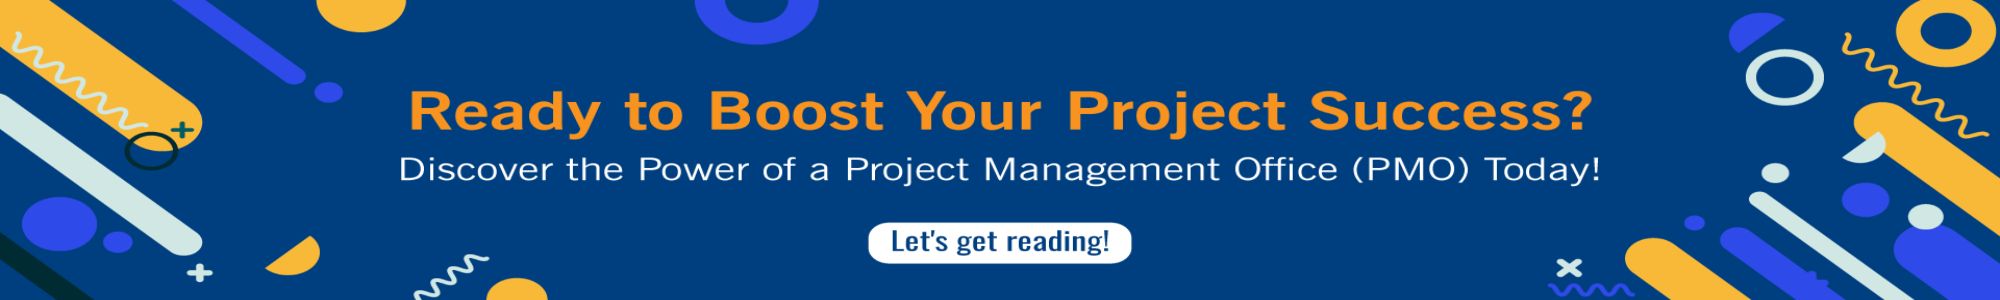 Discover the power of a project management office today